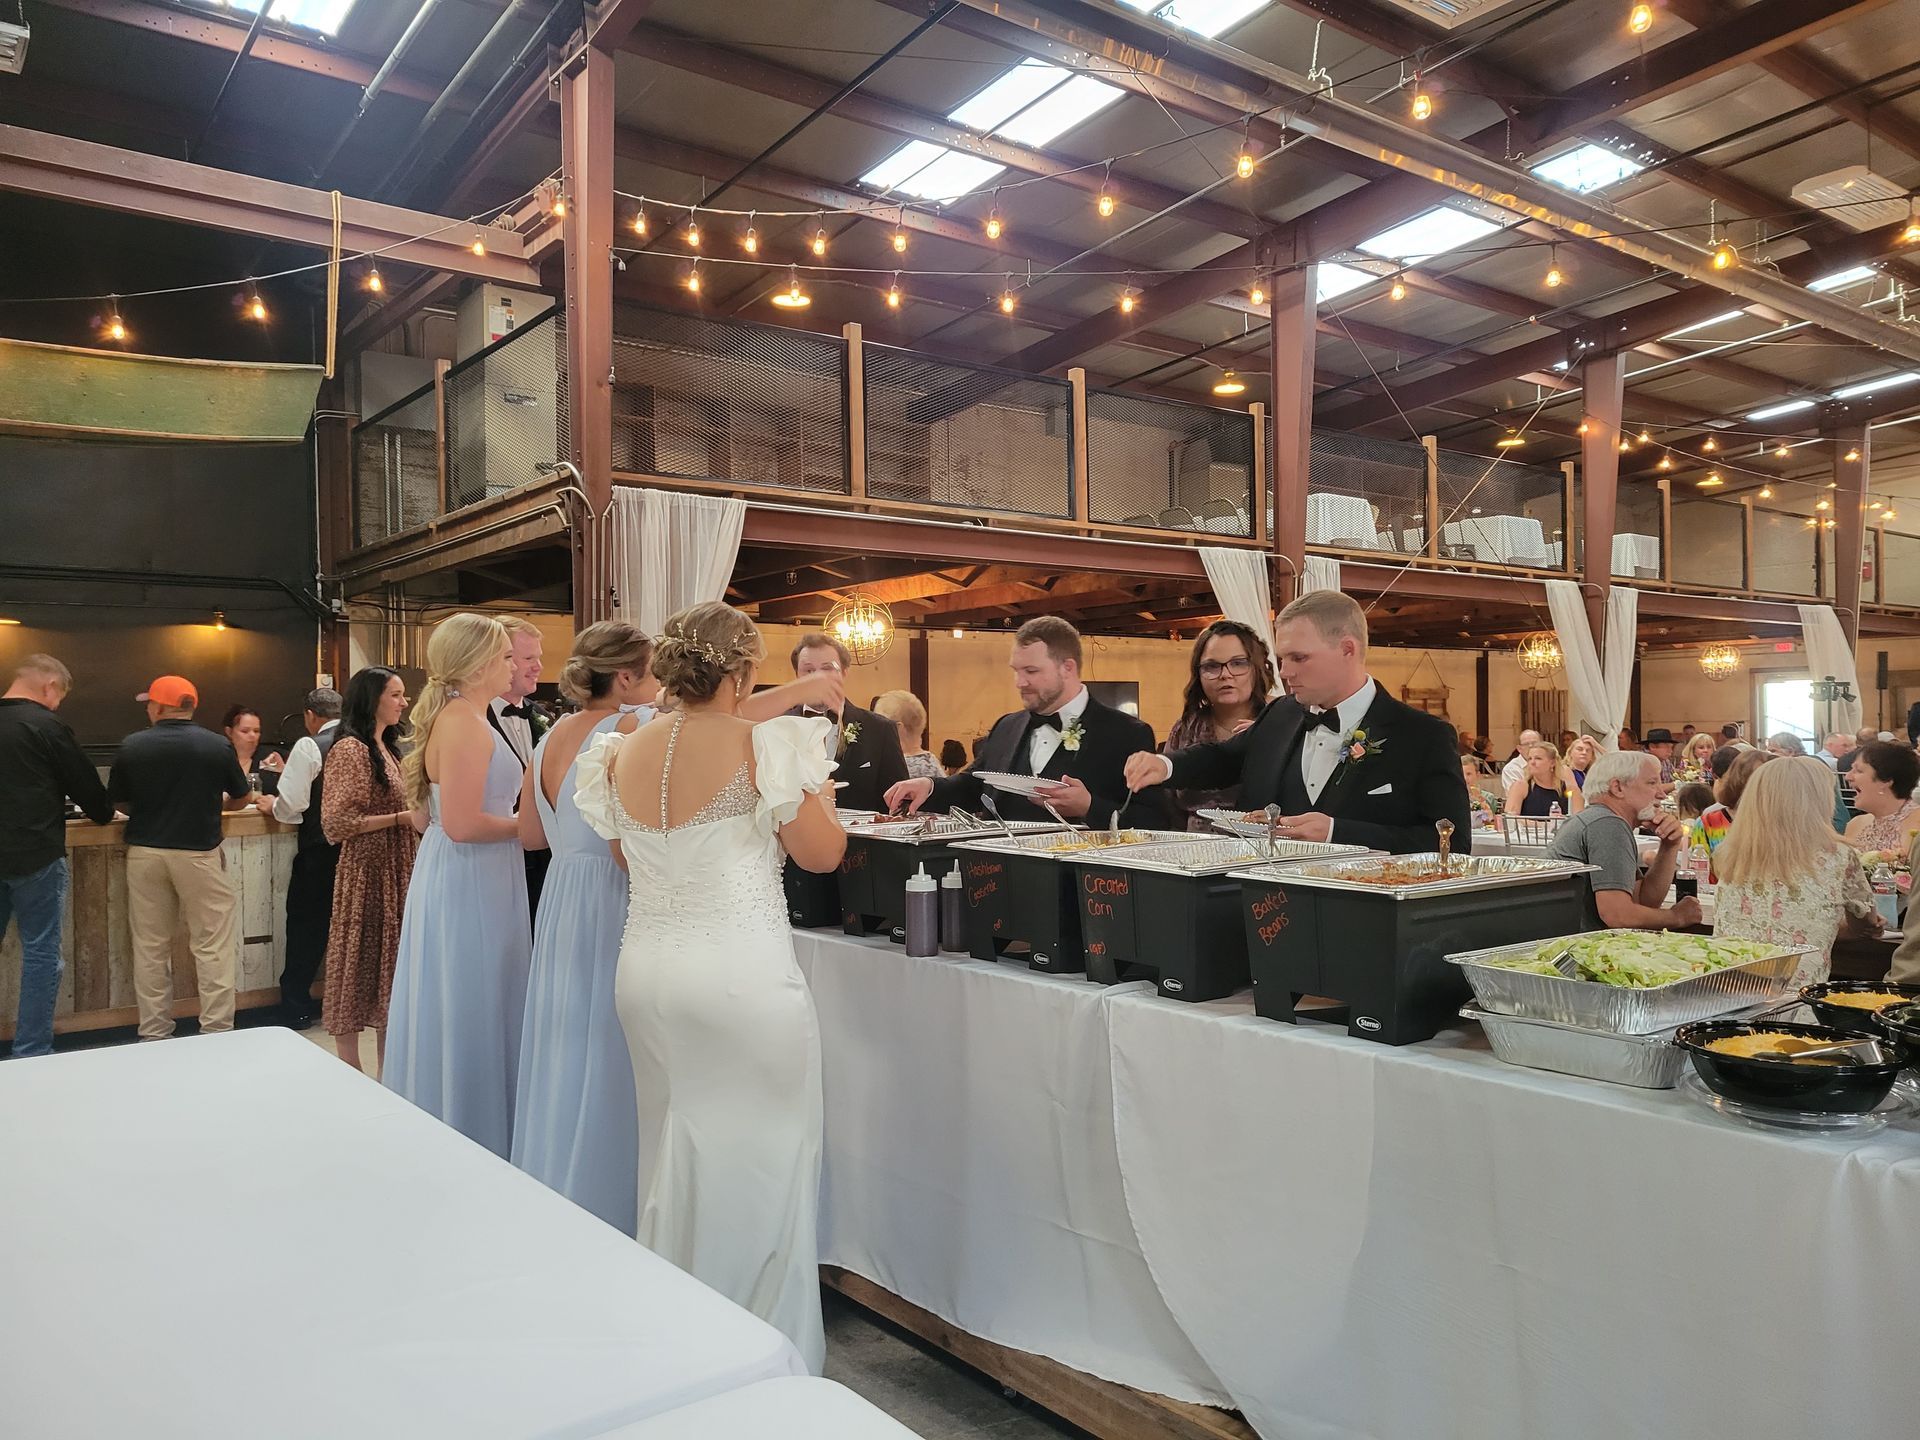 A group of people are standing around a buffet line at a wedding reception.